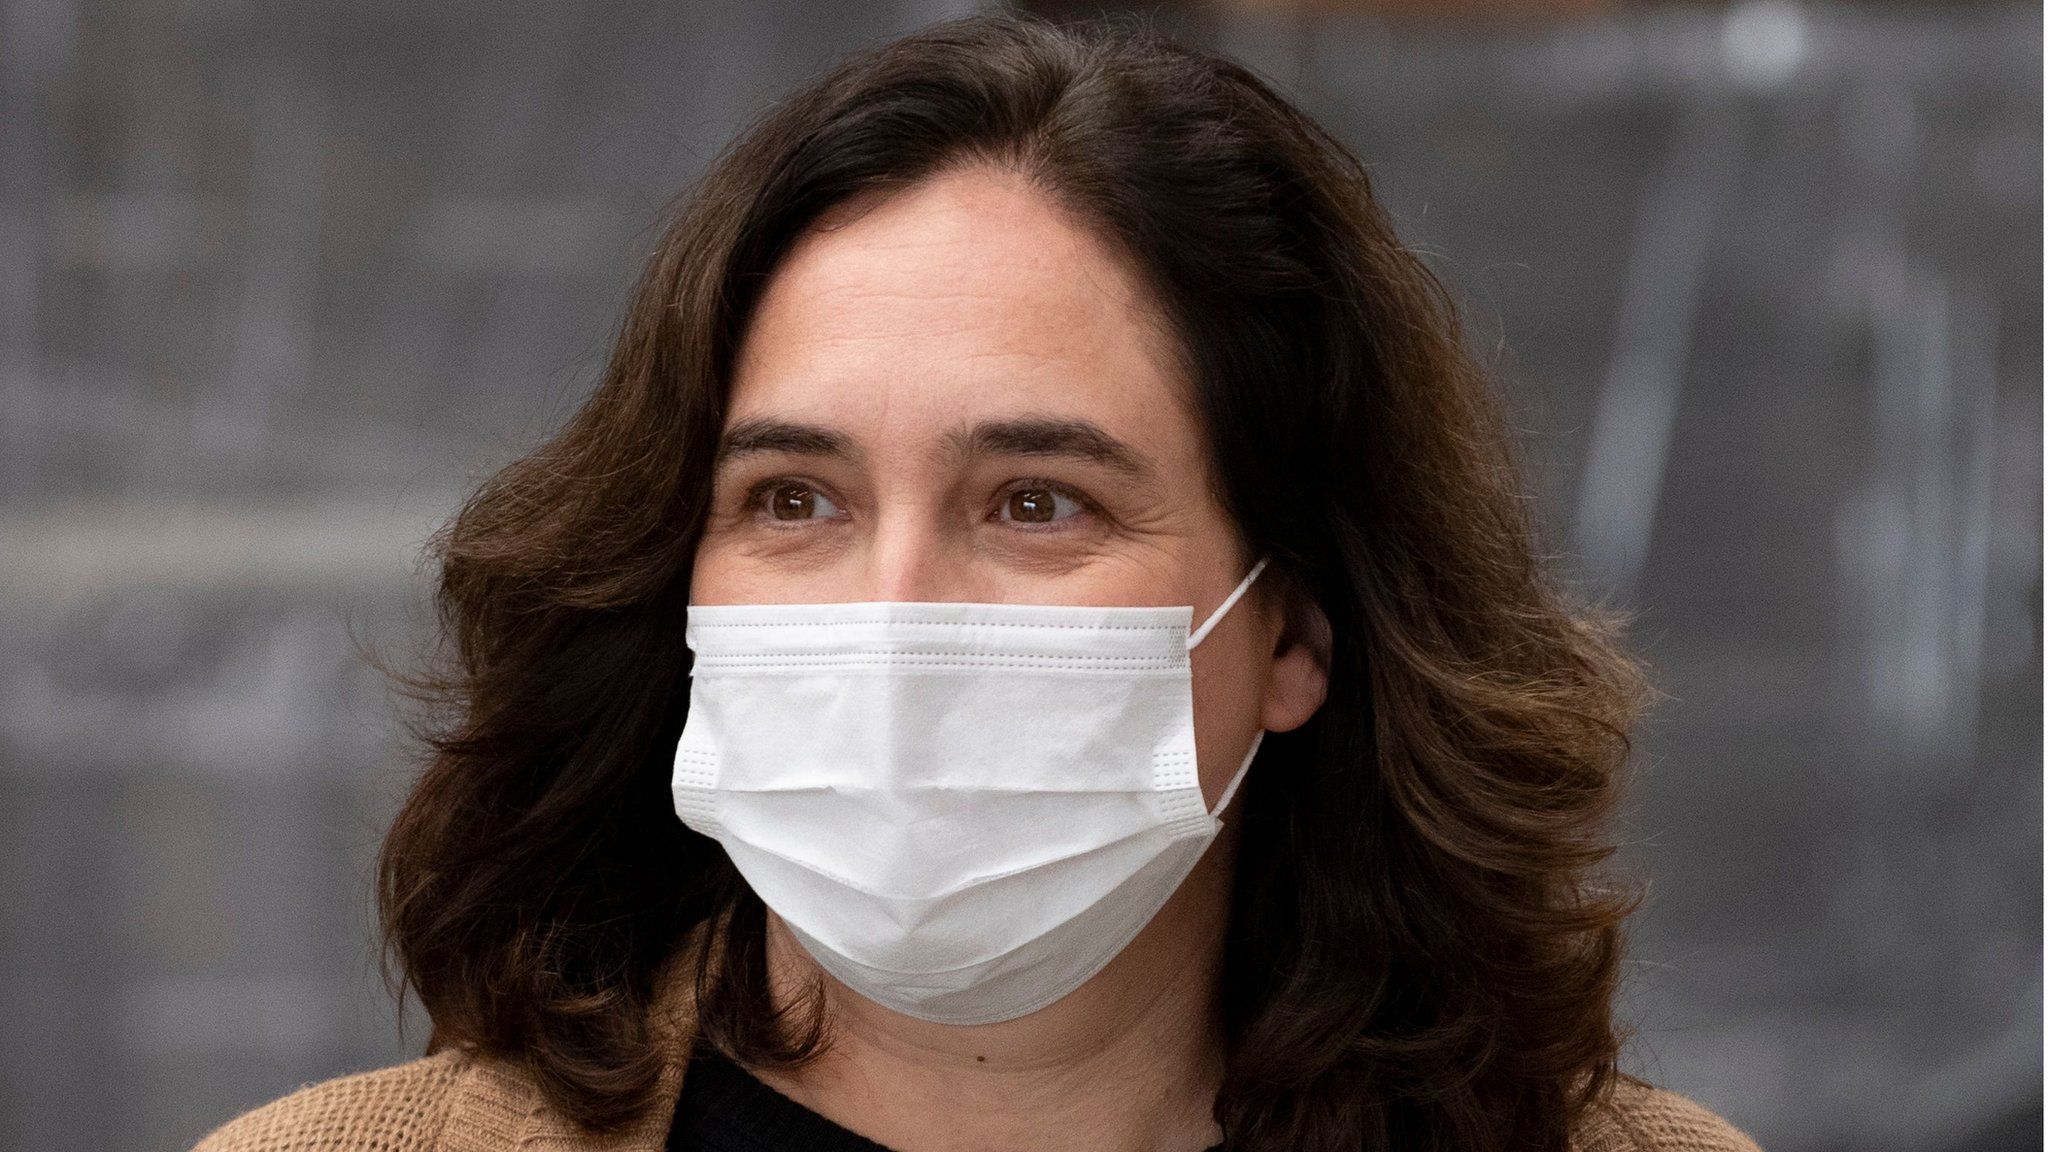 Ada Colau photographed in a face mask